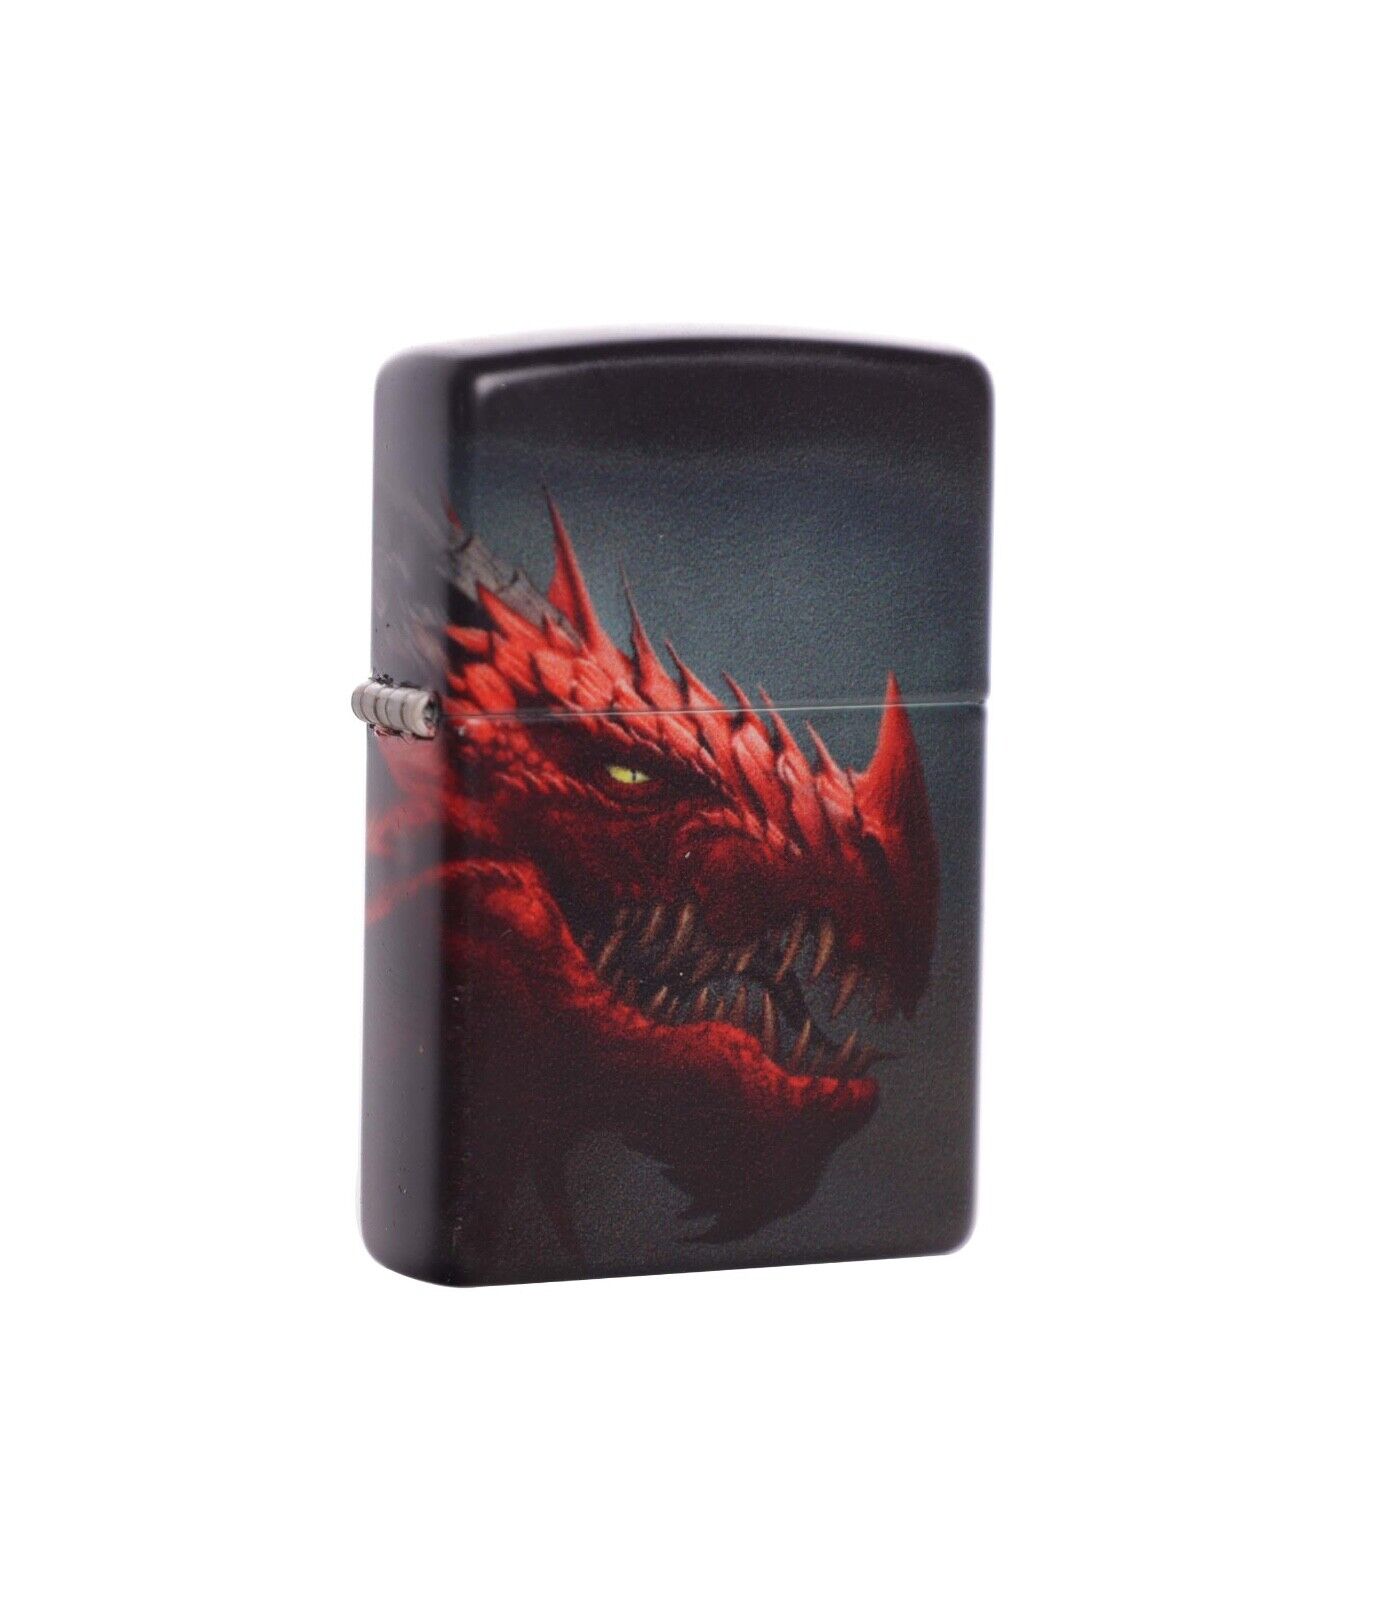 Zippo Red Dragon Design Windproof Lighter-48777. Available Now for 36.95